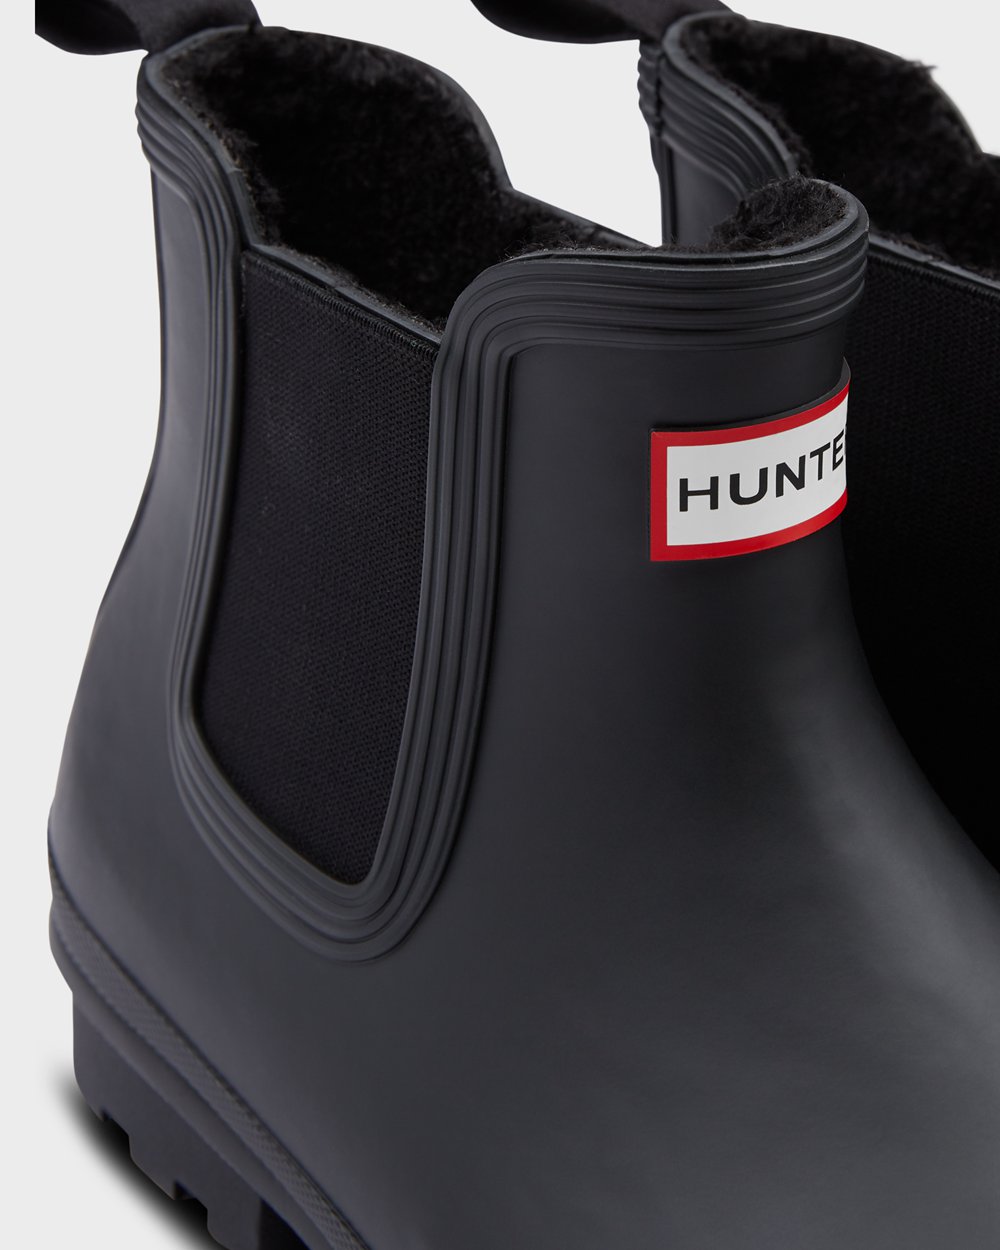 Mens Chelsea Boots - Hunter Original Insulated (03MUHNLWS) - Black